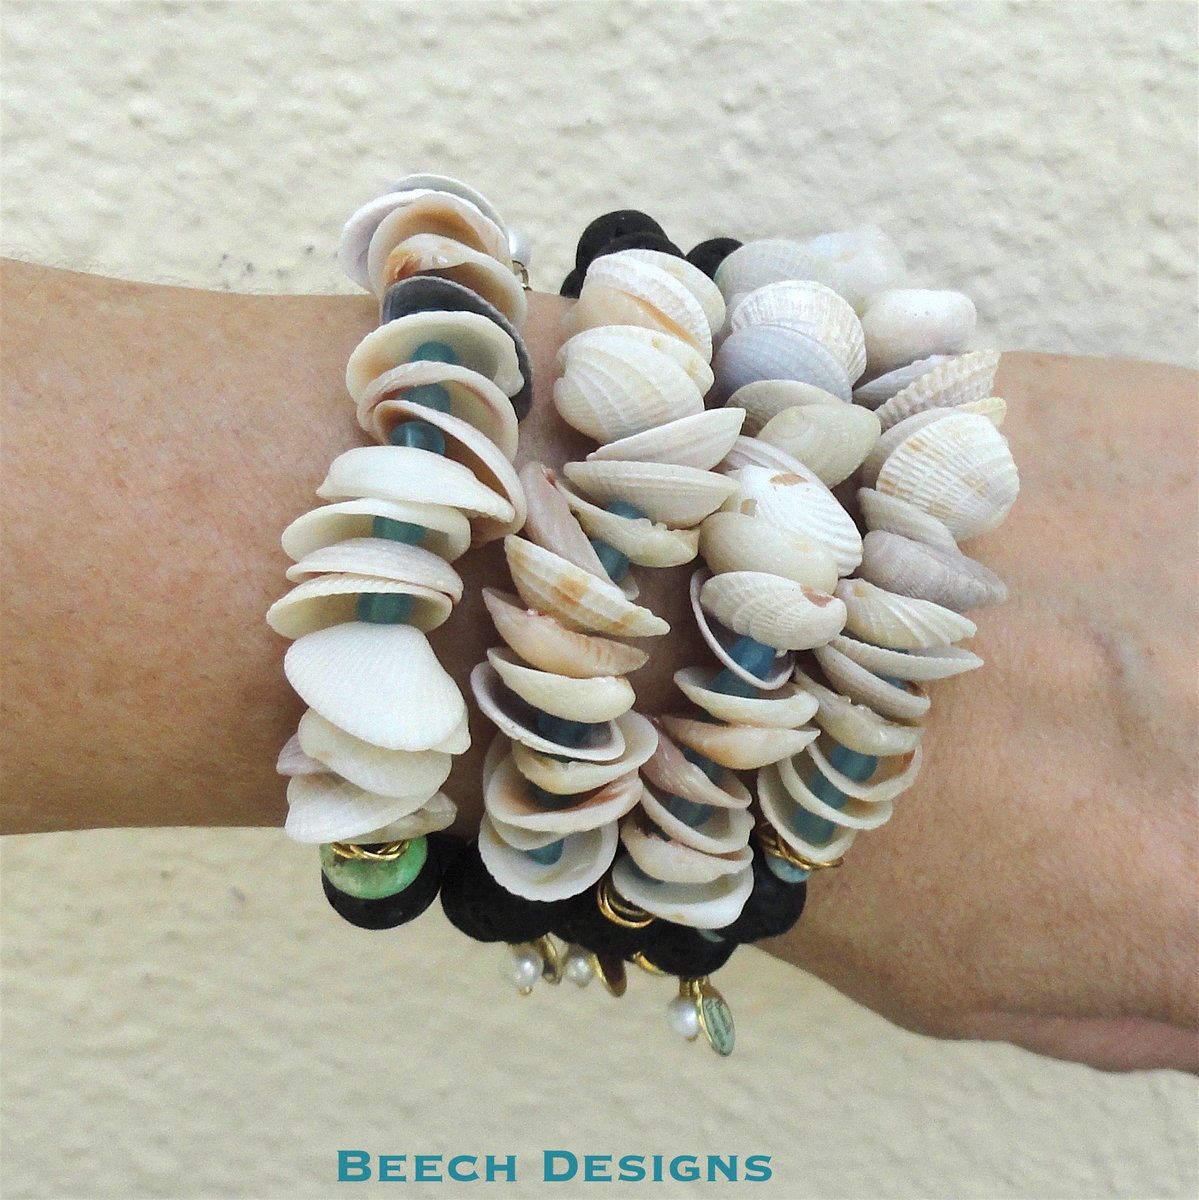 🐚🎶୧˚₊˚This new batch of Shell Malas are about following your bliss. 📿#shells #shelljewelry #beechdesigns #malas #malabracelets #shellmalas #chunkyjewelry #beachdesigns #island #islands #islandjewelry #islandvibes #soulvibes #giftguide #locallove  #bohojewelry #bohemianstyle